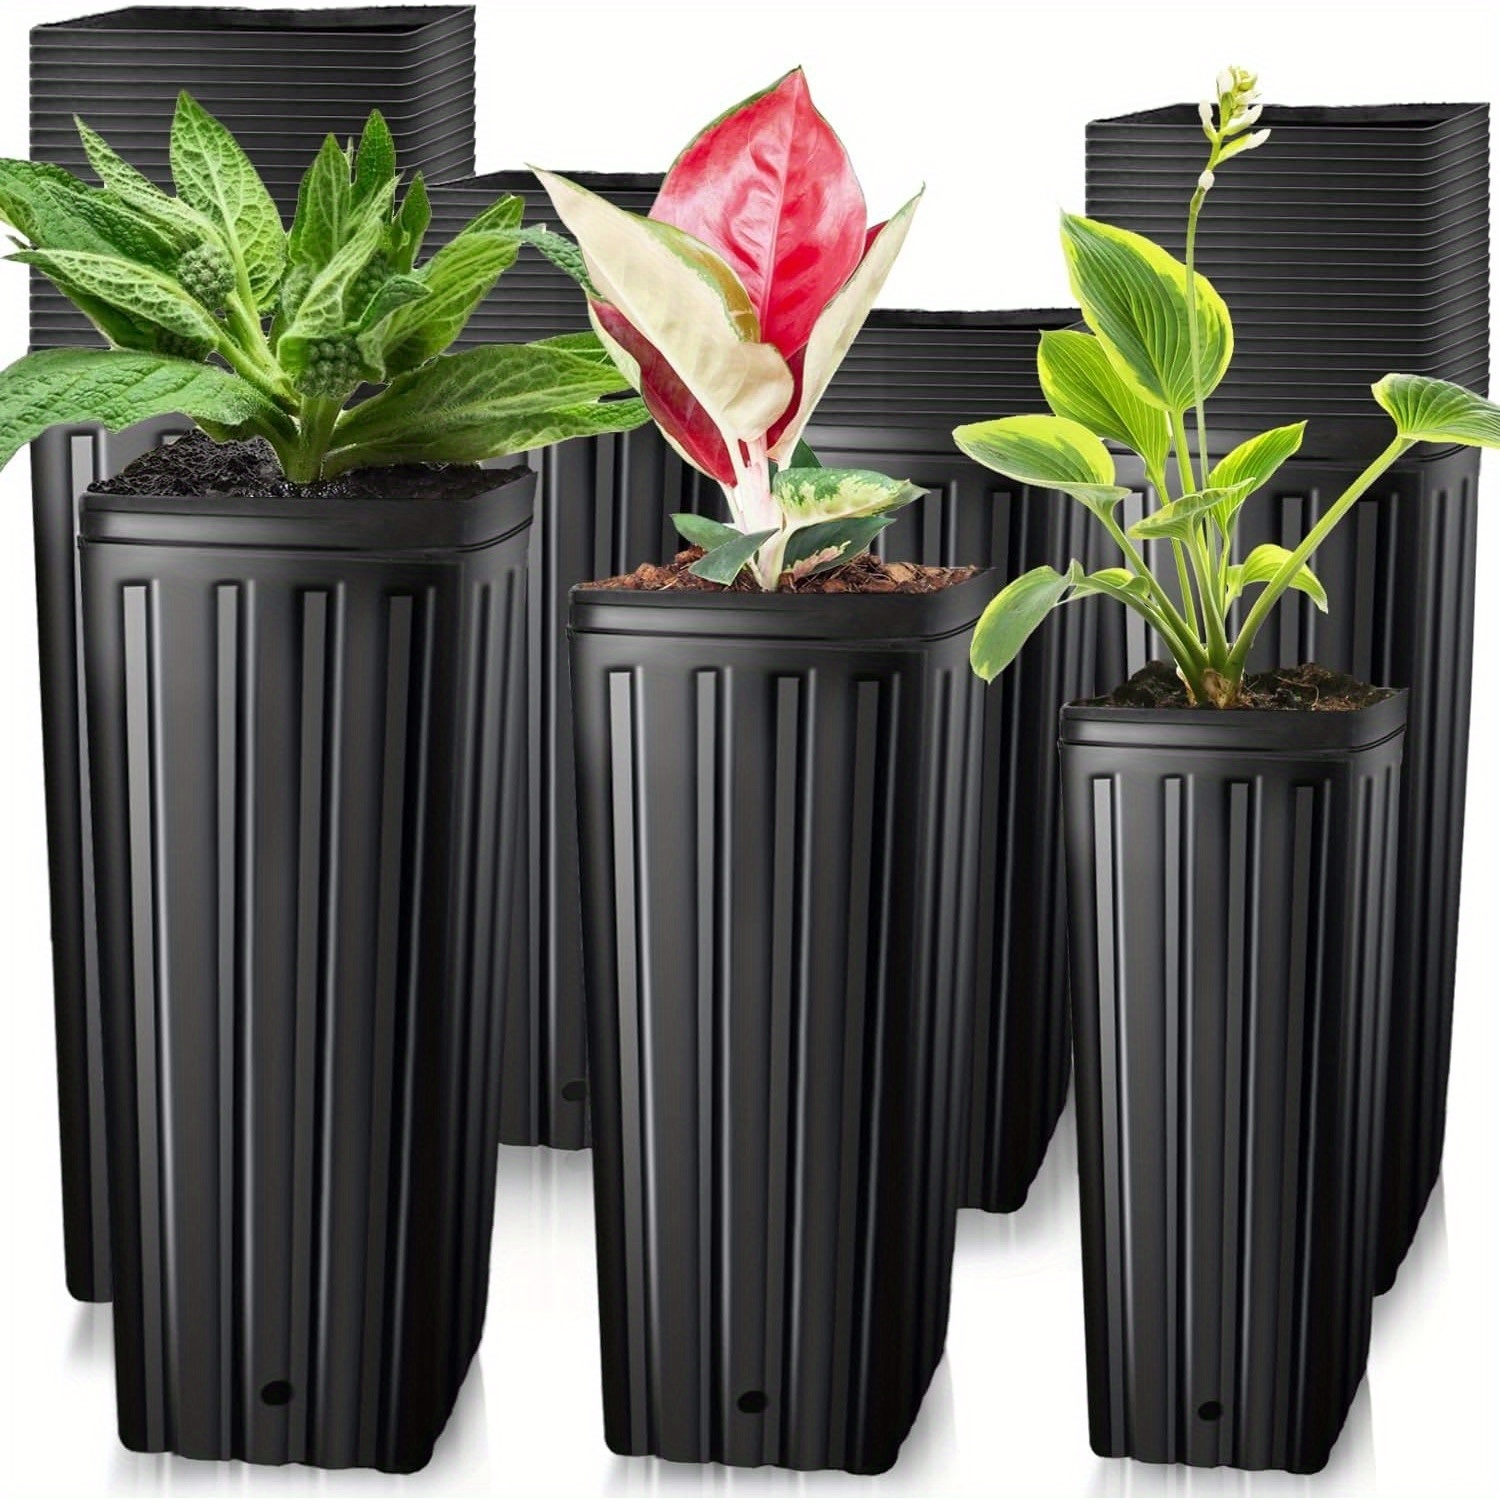 

20pcs, Plastic Deep Plant Nursery Pots, (3 Size-7.8" H+9.8" H+12.2" H) Tall Tree Pots With Drainage Holes, Black Deep Seedling Container Pots For Indoor Outdoor Gardening